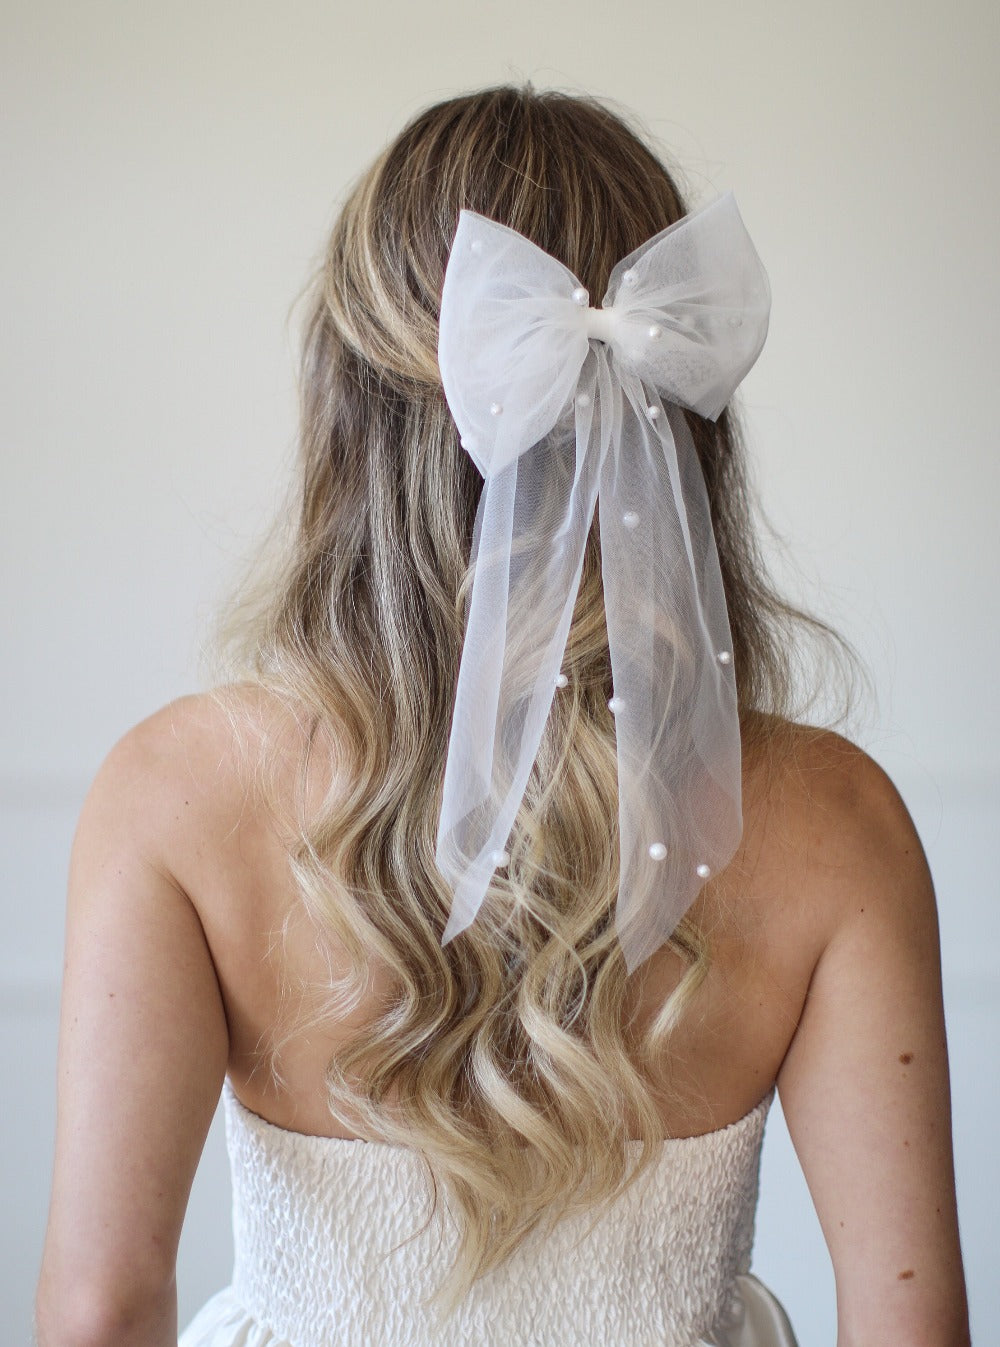 Tulle Pearl Hair Bow - White